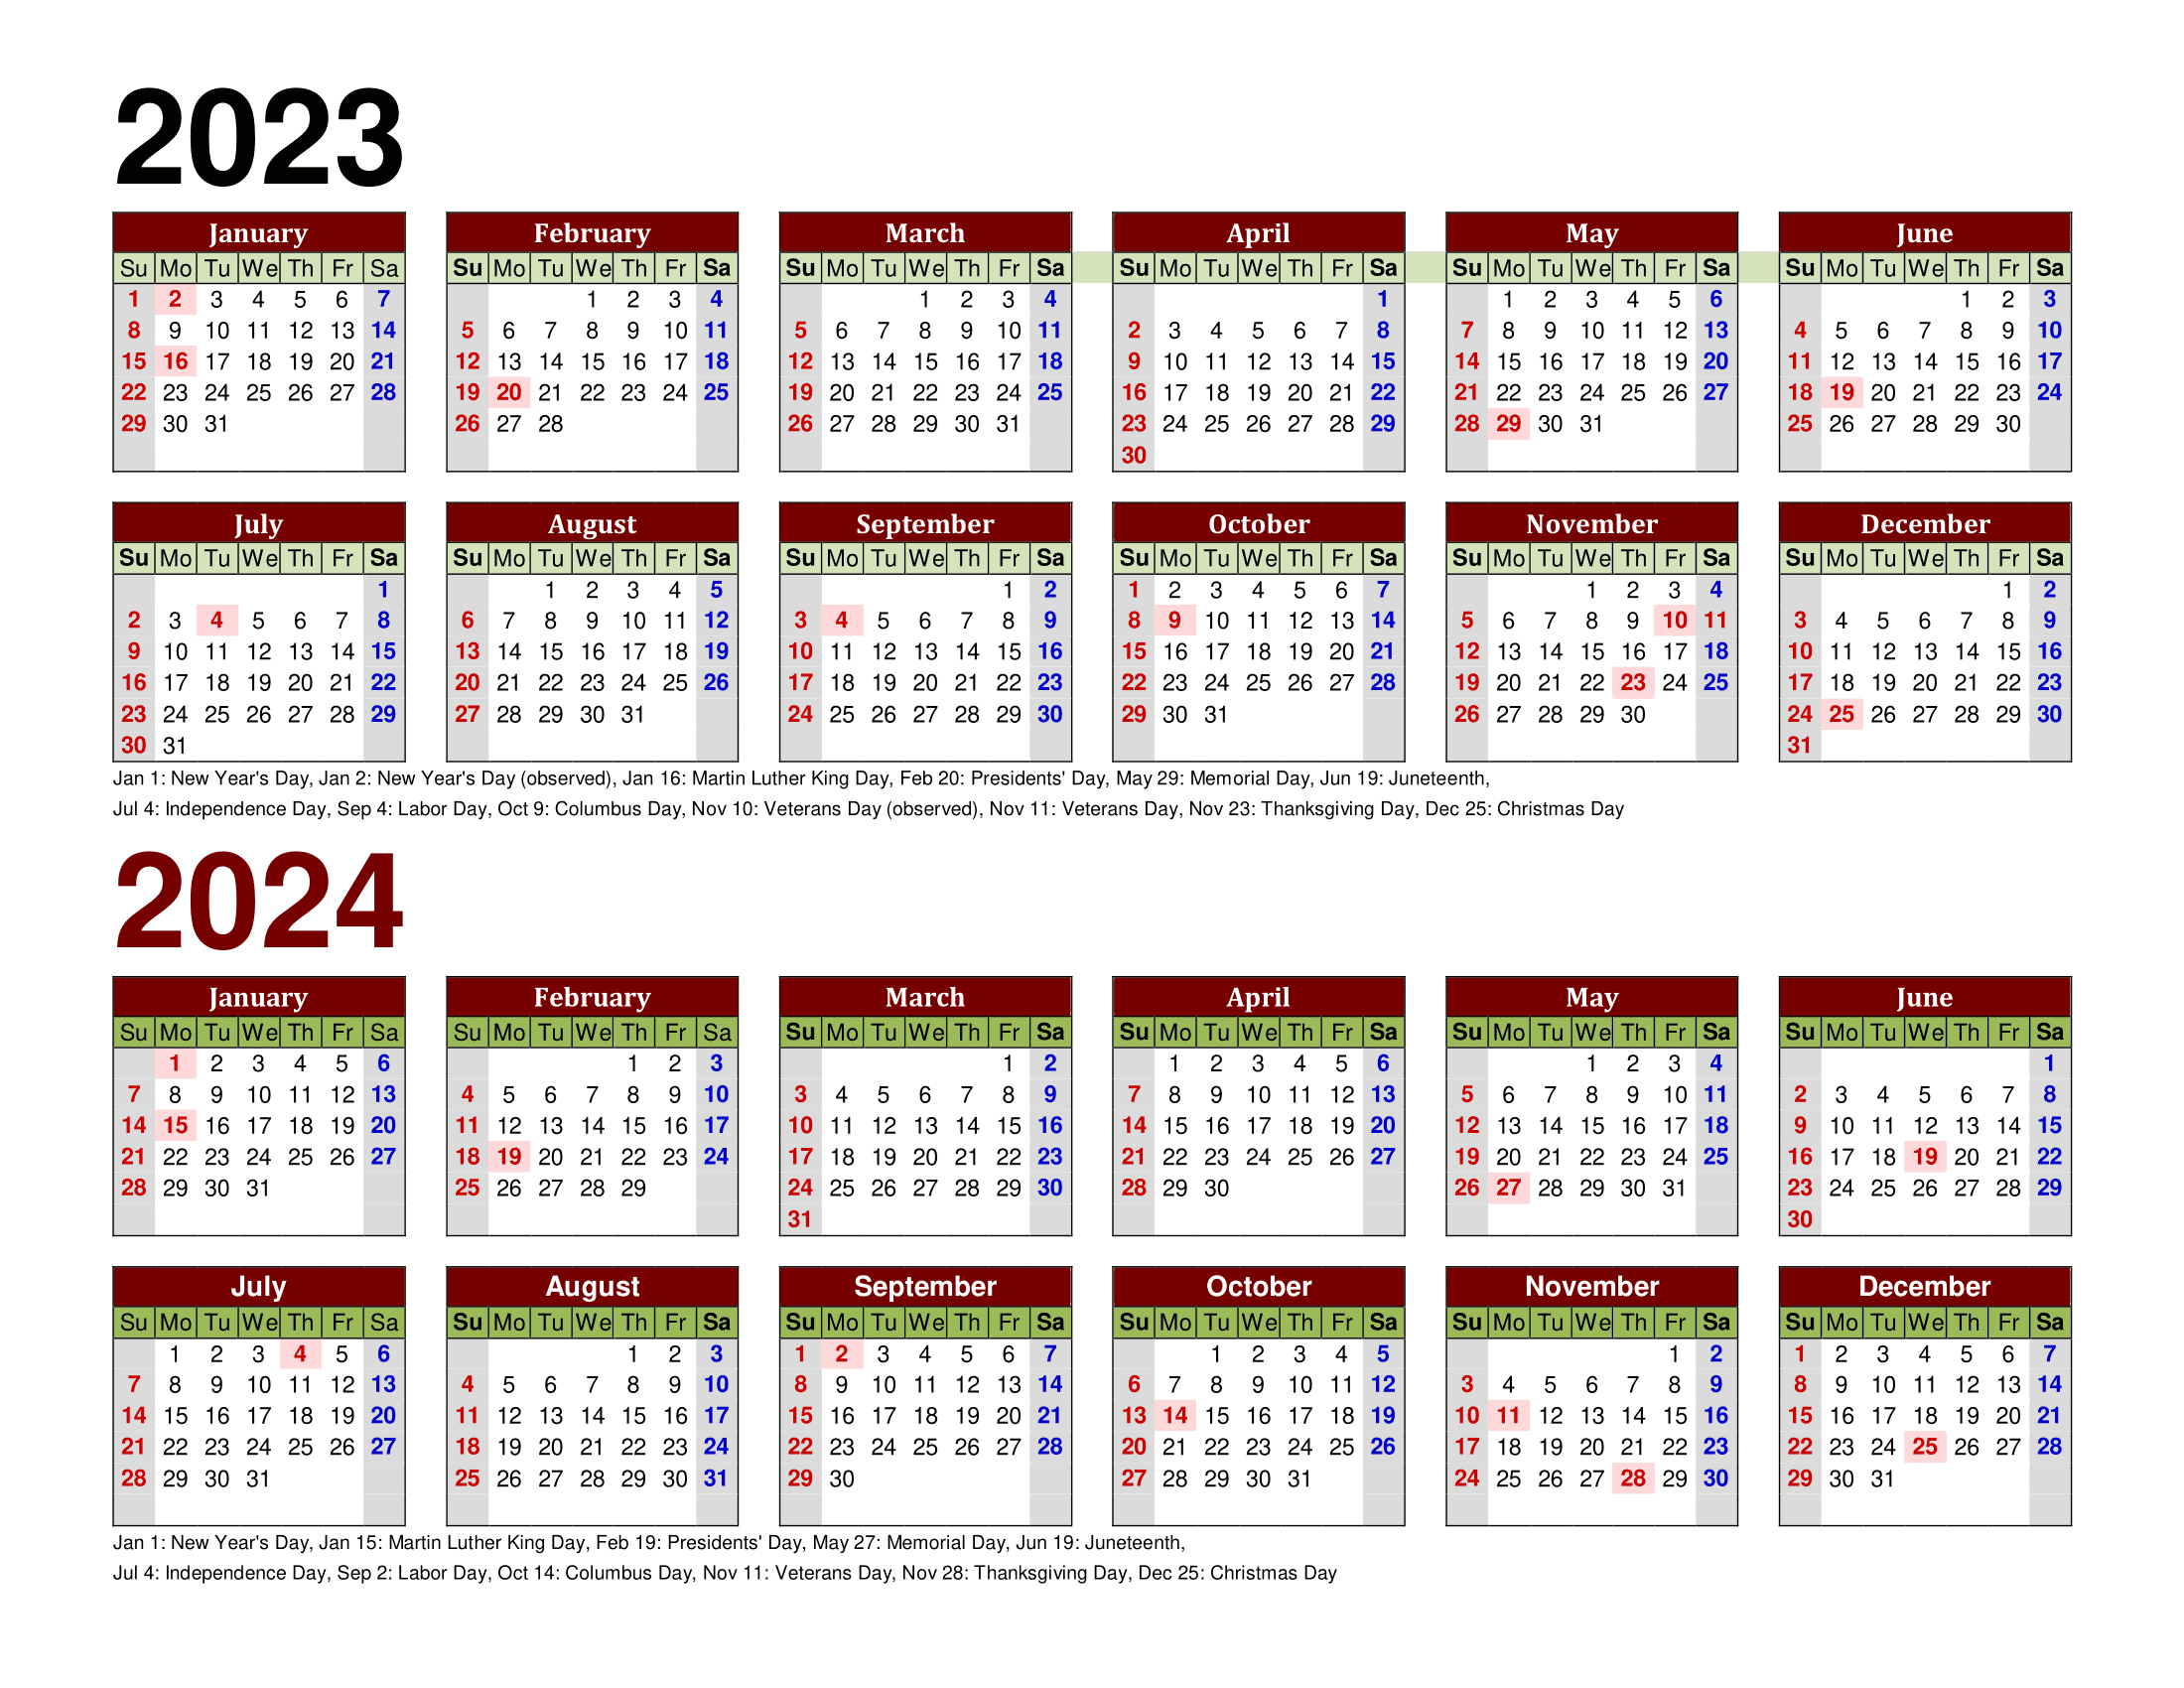 Free Printable Two Year Calendar Templates For 2023 And 2024 In Pdf | 2 Year Printable Calendar 2023 And 2024